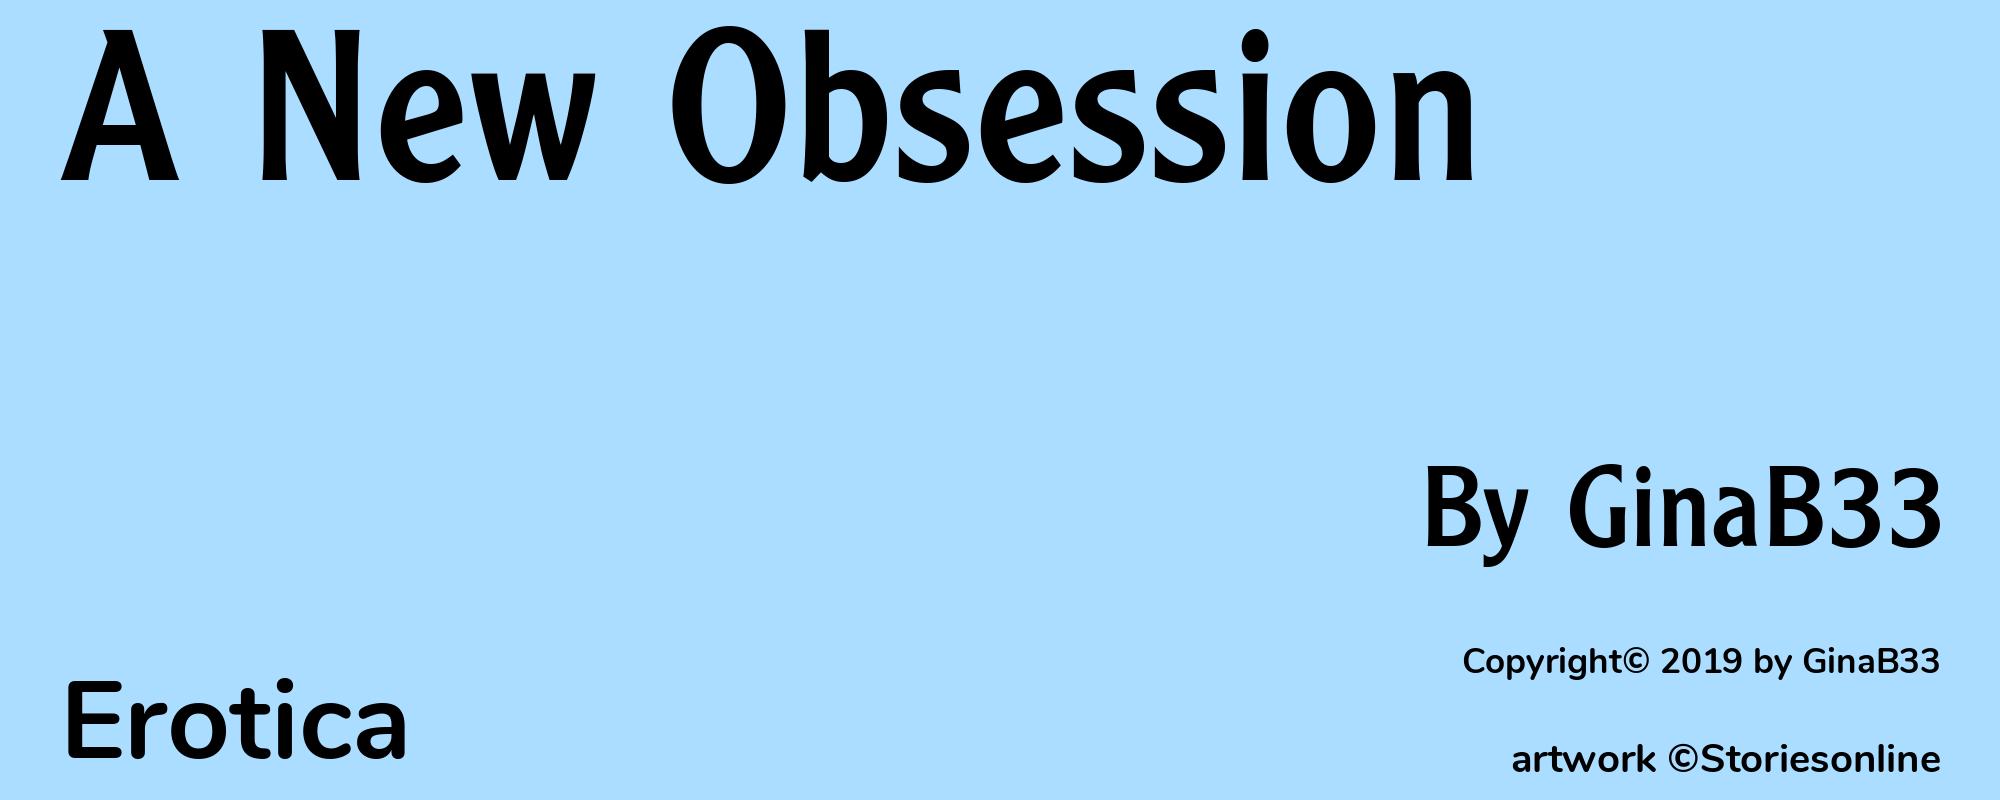 A New Obsession - Cover